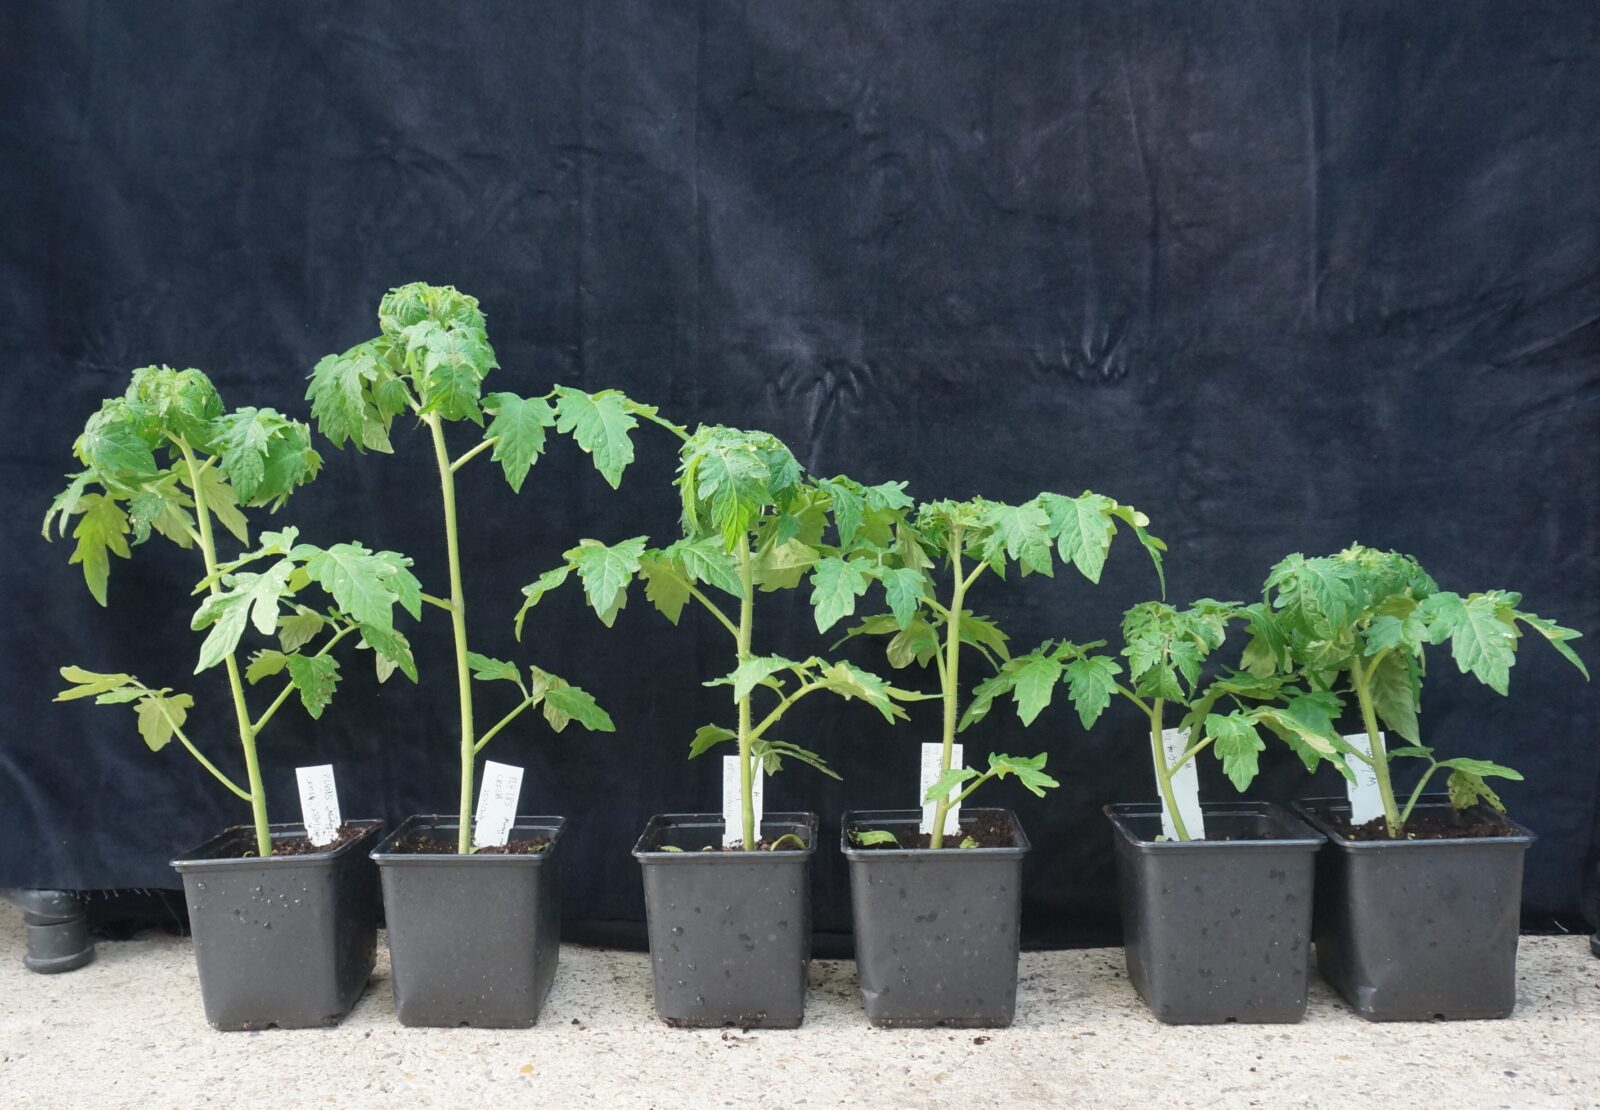 Photograph of tomato plants modified so that they adopt a dwarf habit